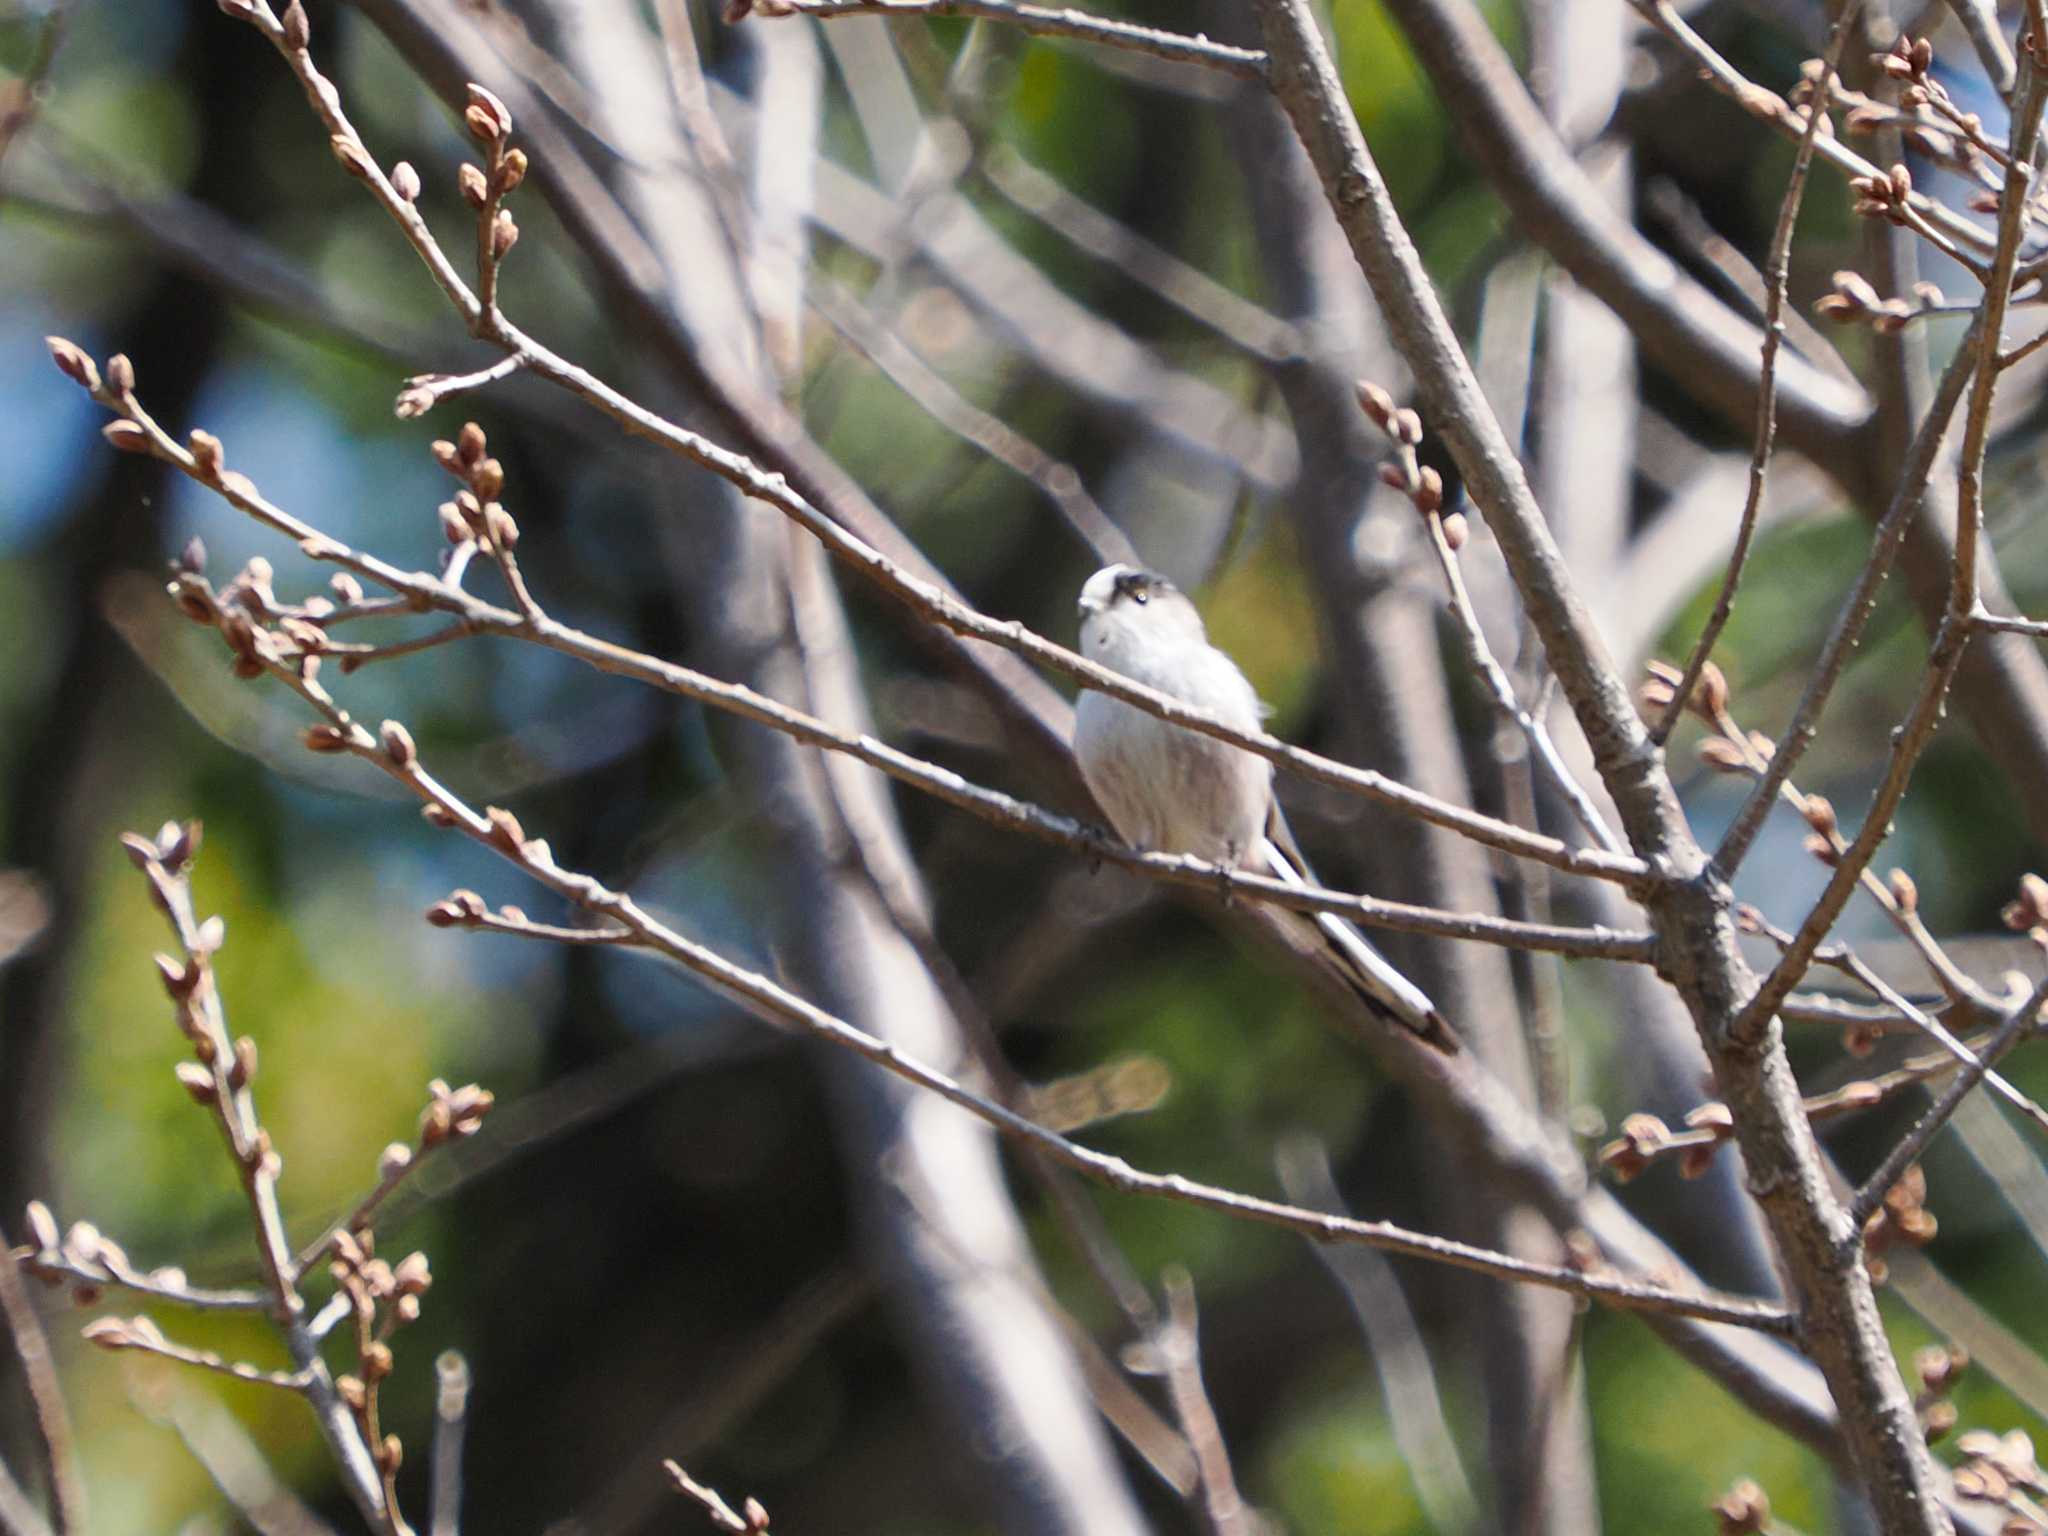 Photo of Long-tailed Tit at Imperial Palace by 98_Ark (98ｱｰｸ)